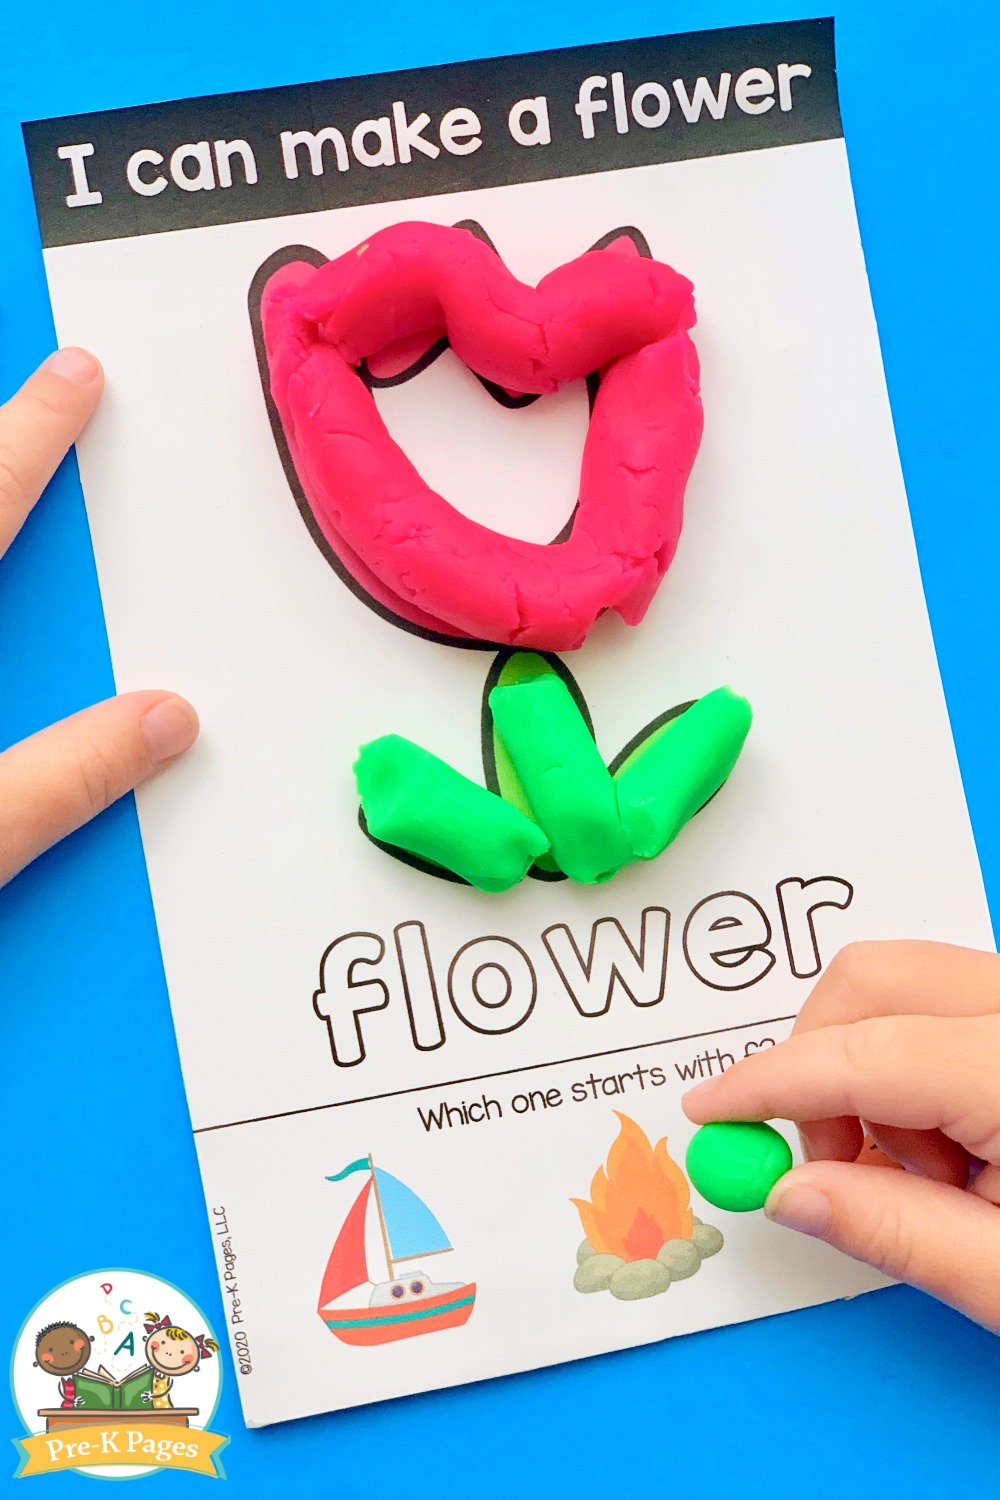 Making a flower with play dough